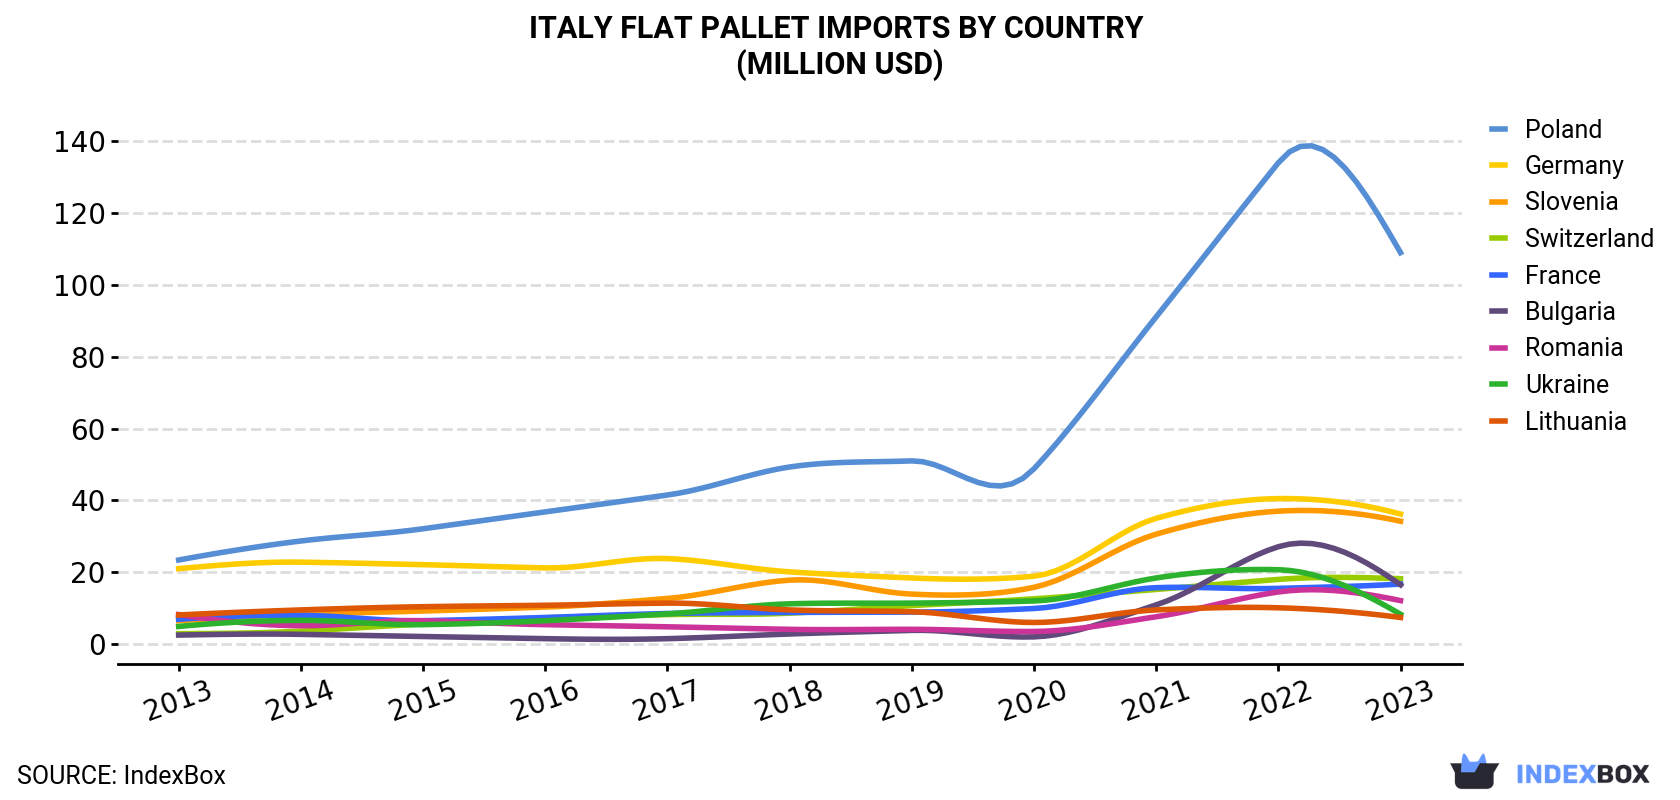 Italy Flat Pallet Imports By Country (Million USD)